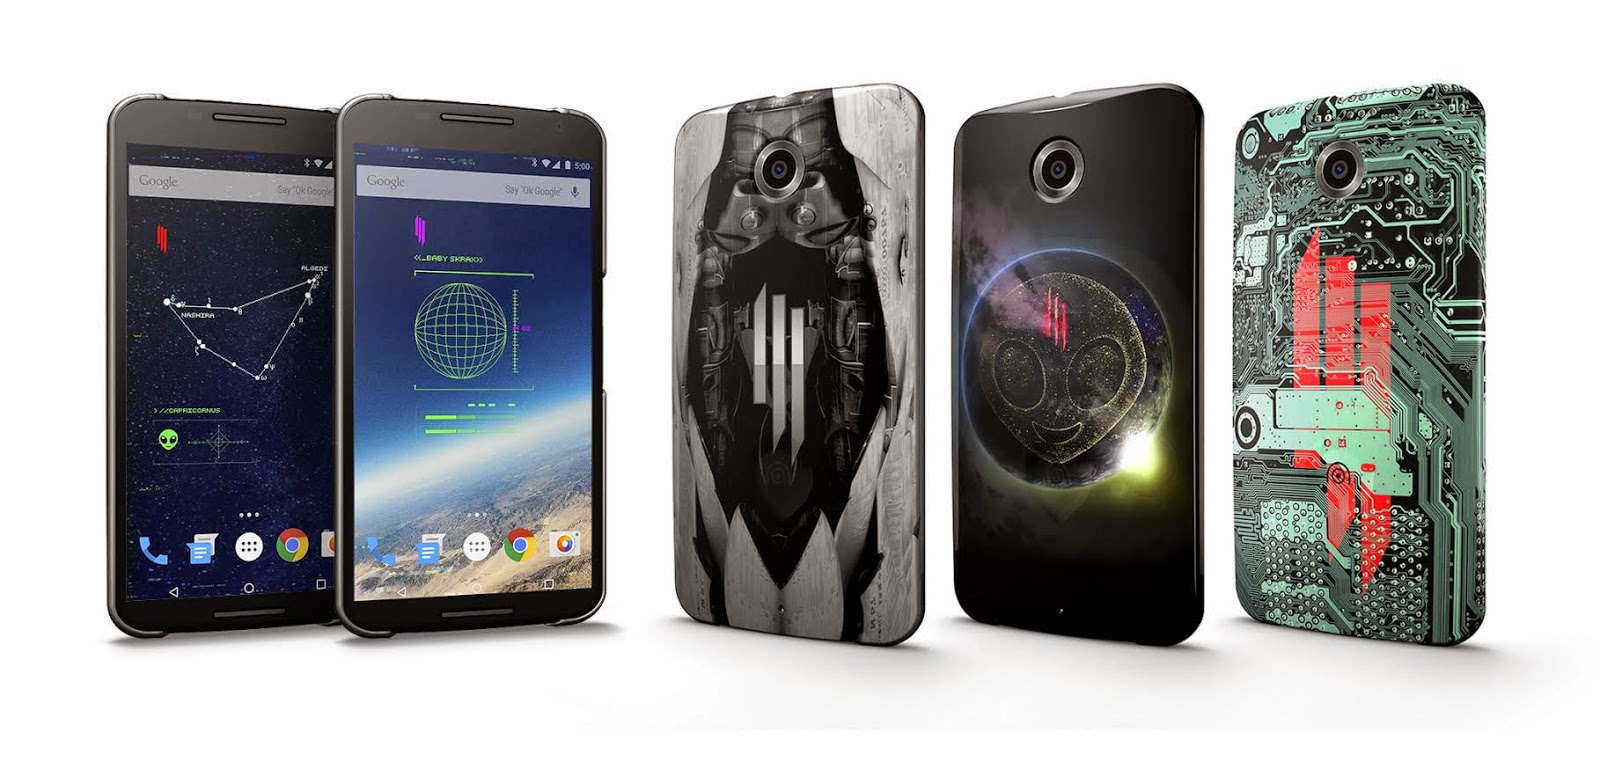 Google limited-edition custom Live Cases named as Enter Additions